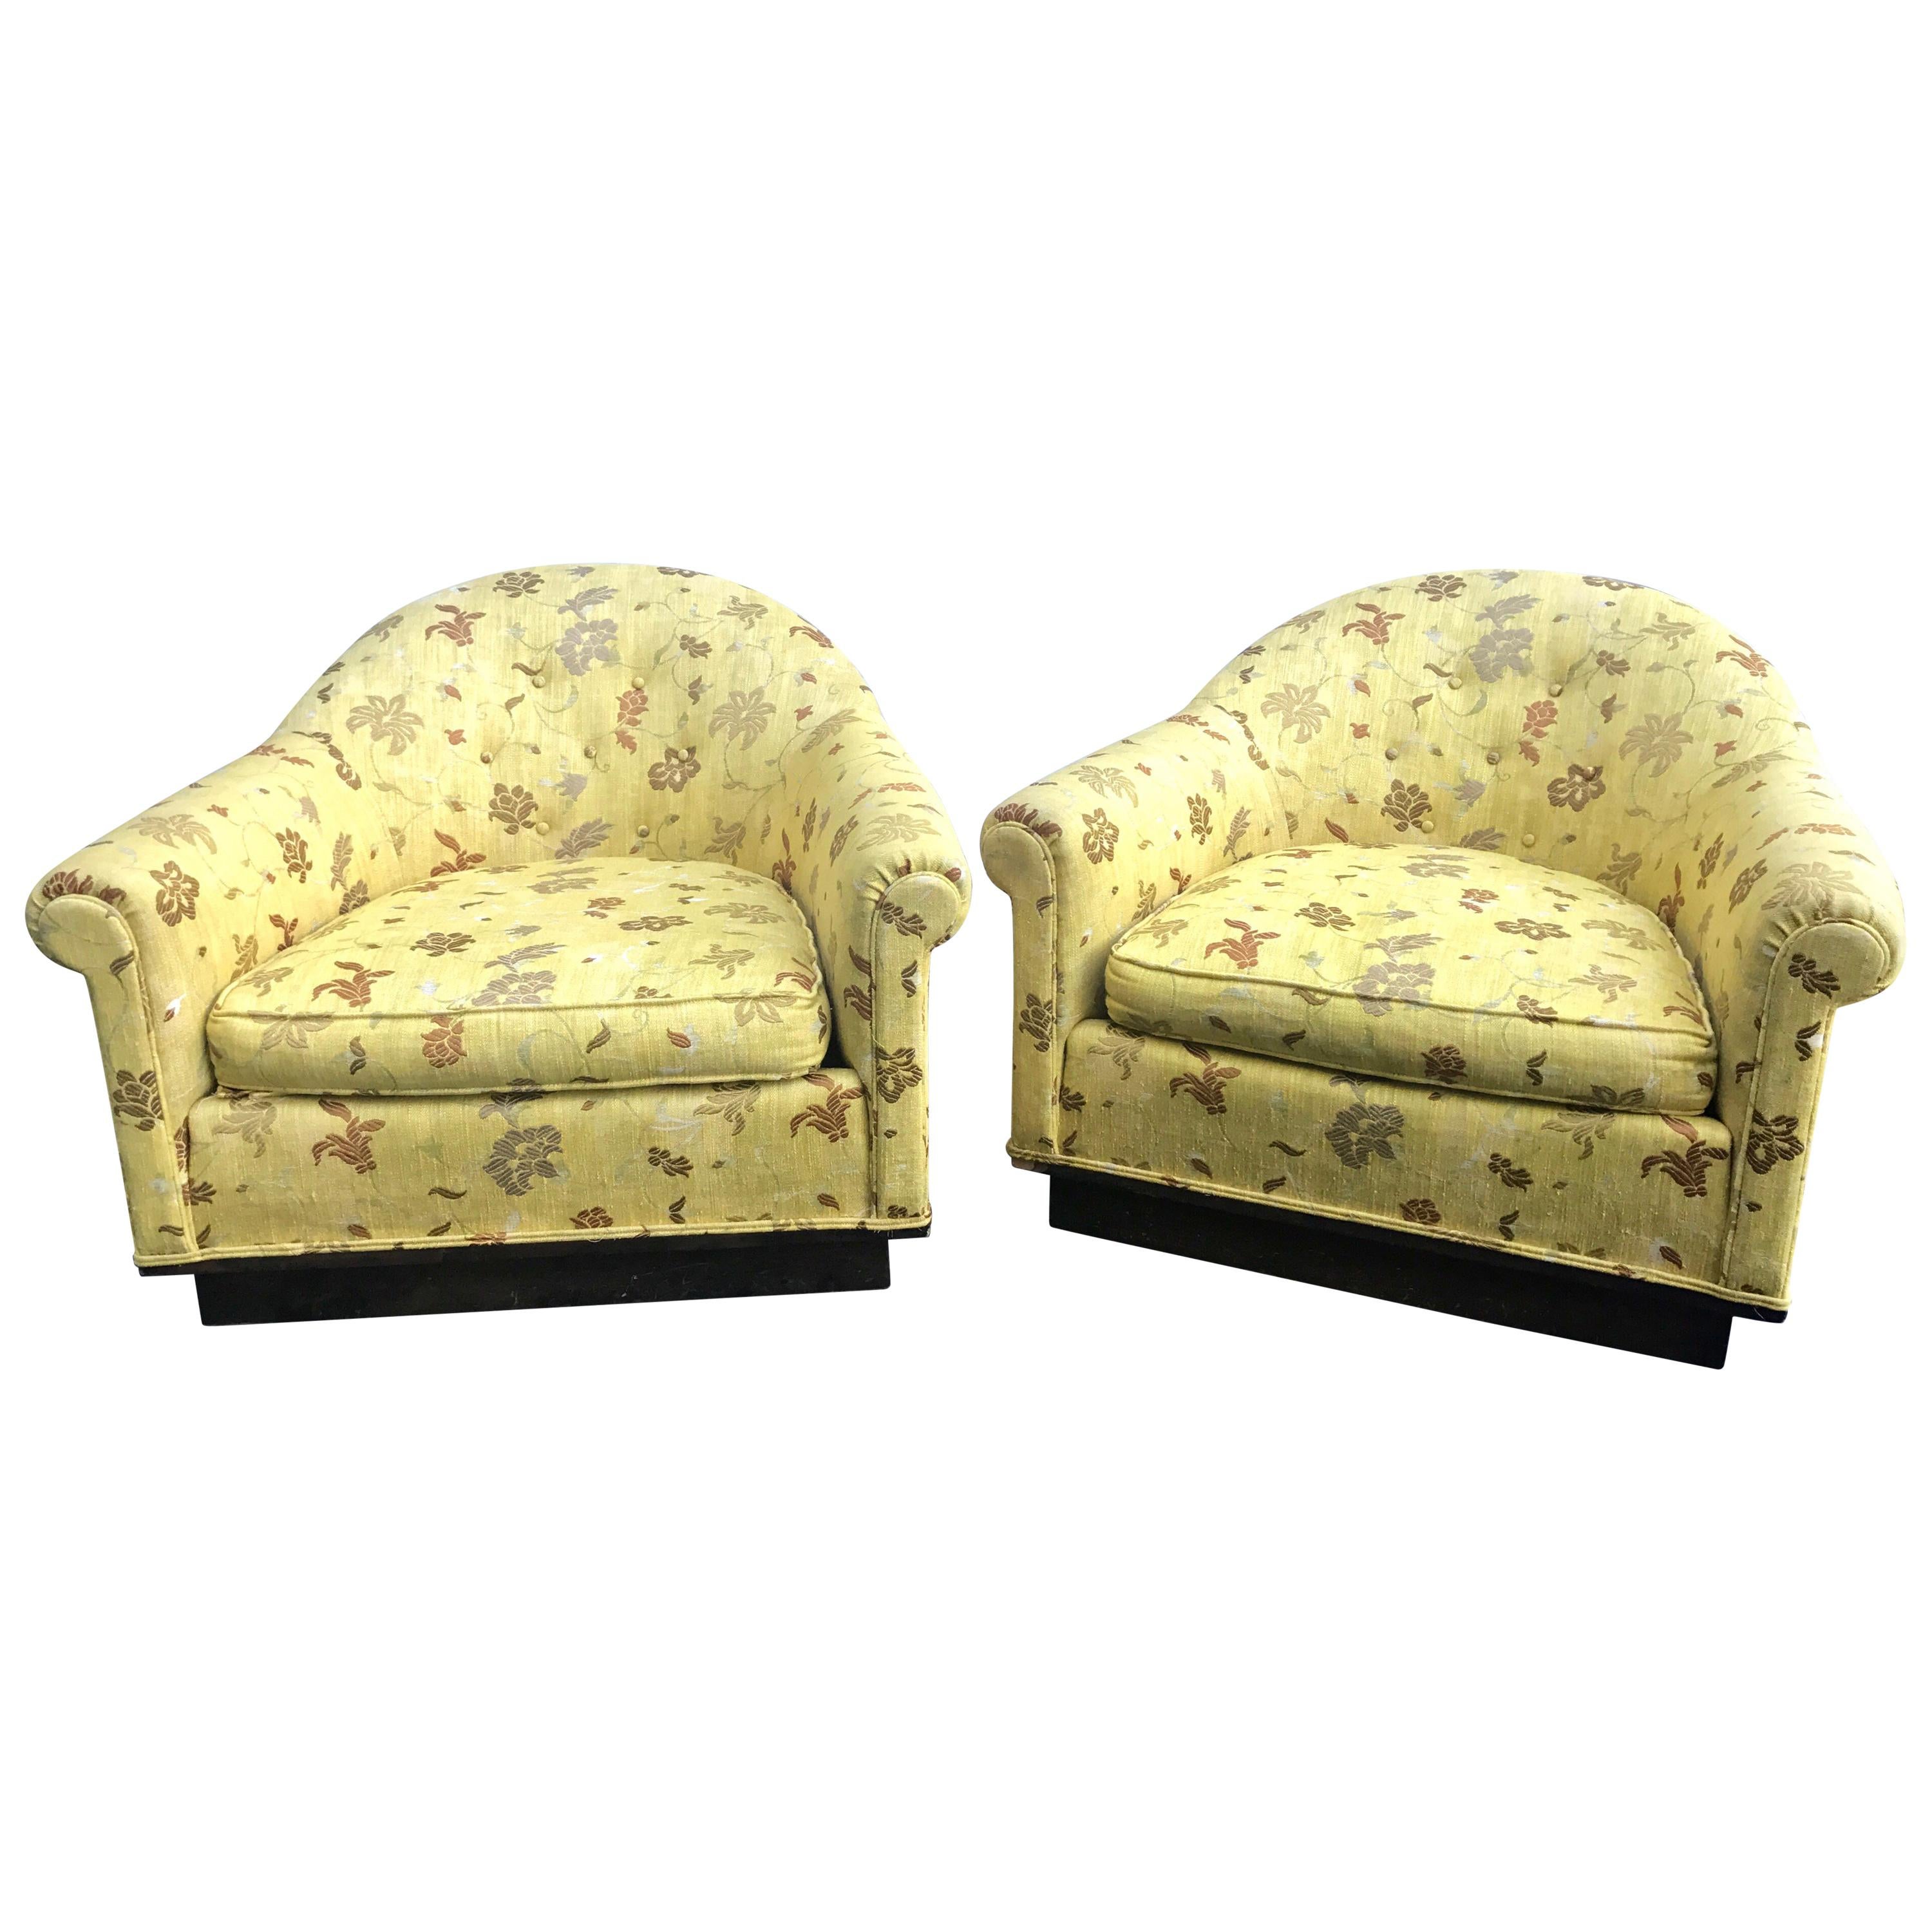 Pair of Milo Baughman Style Yellow Gold Scalamandre Midcentury Chairs